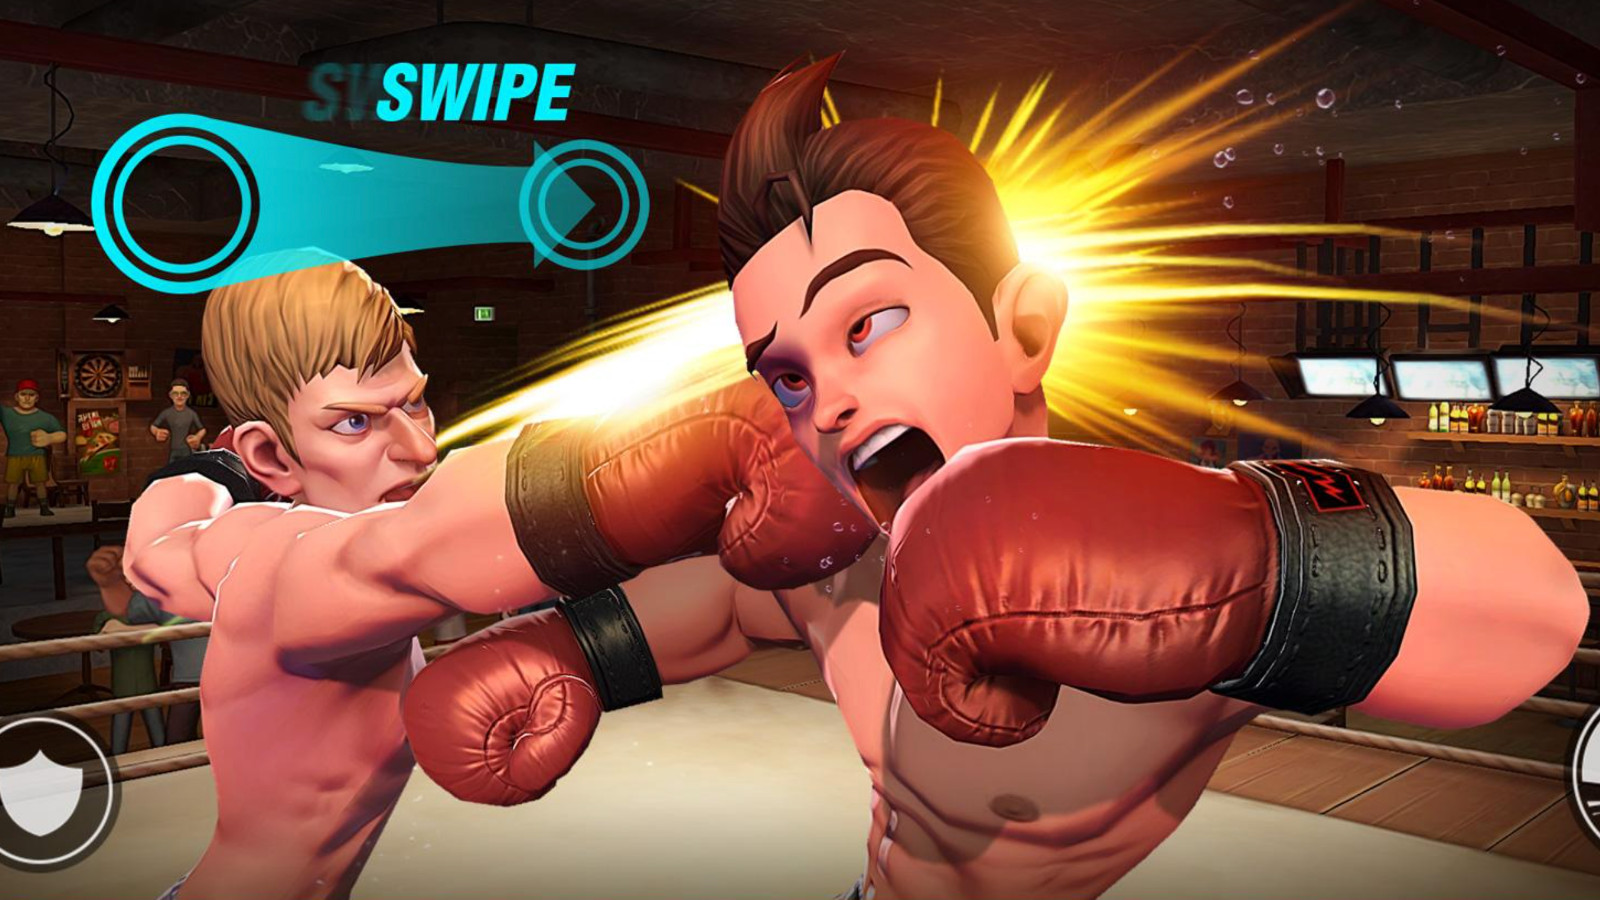 Play Tag Boxing Games: Punch Fight Online for Free on PC & Mobile